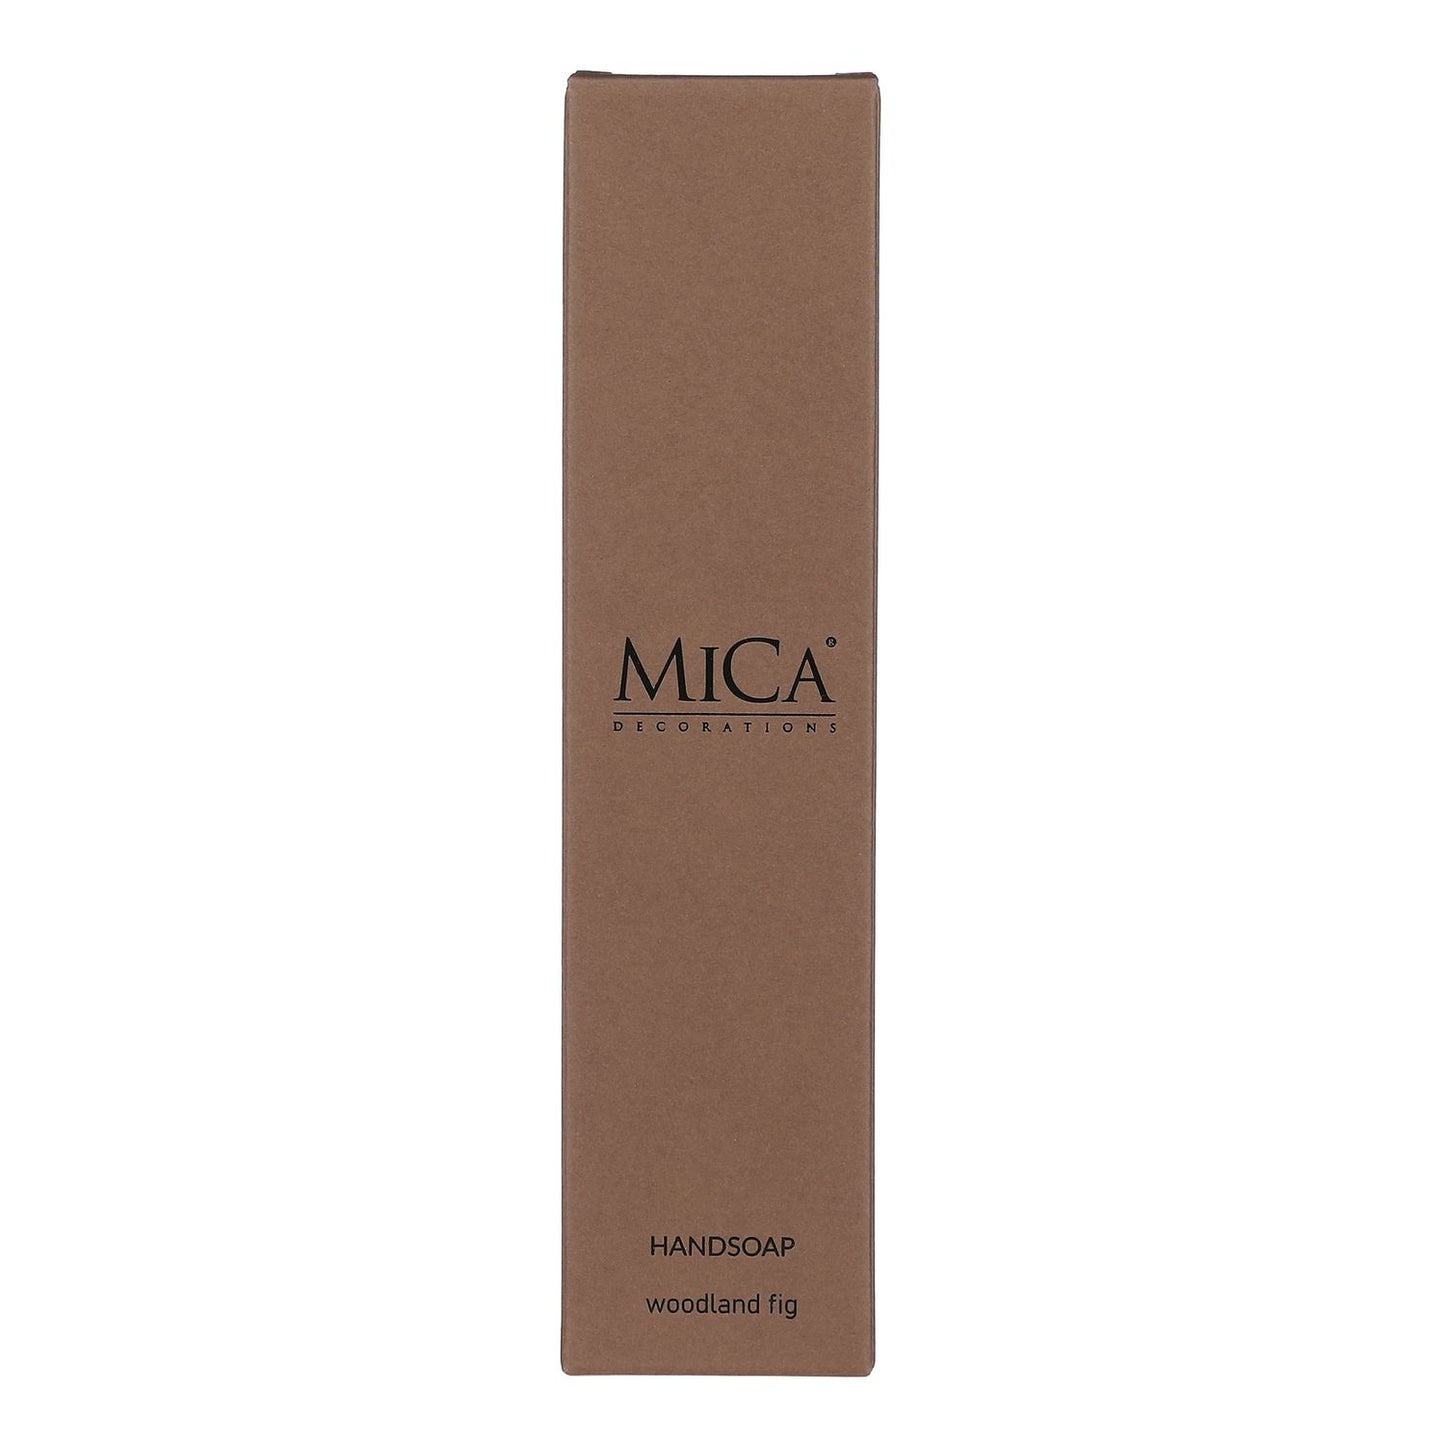 MICA DECORATIONS HAND SOAP (300 ML) - WOODLAND FIG